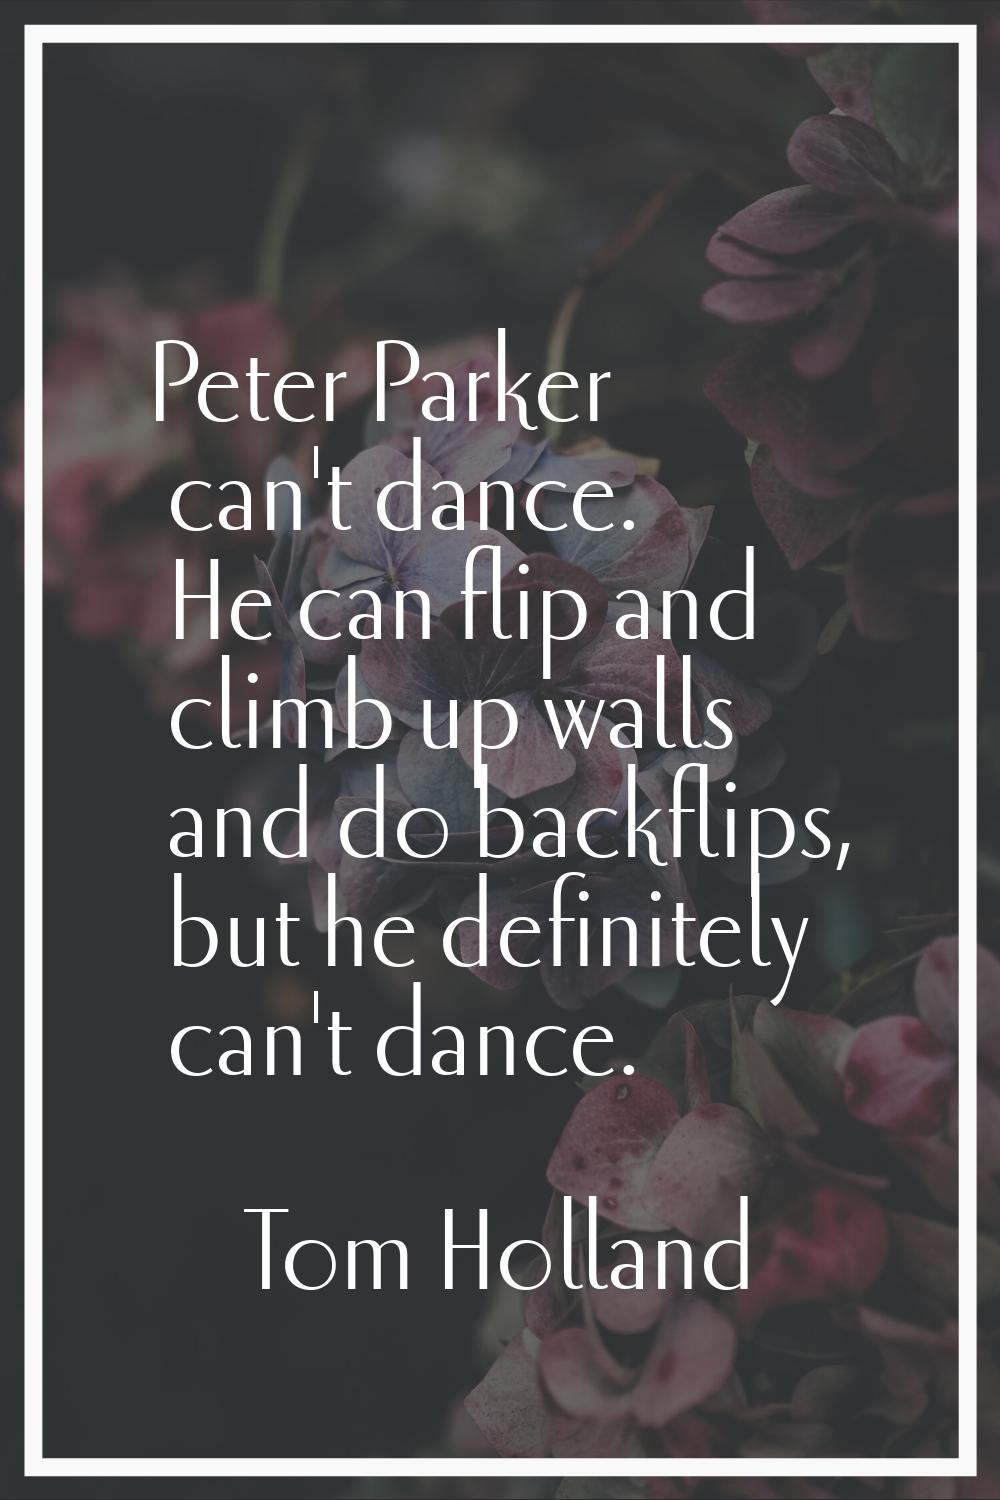 Peter Parker can't dance. He can flip and climb up walls and do backflips, but he definitely can't 